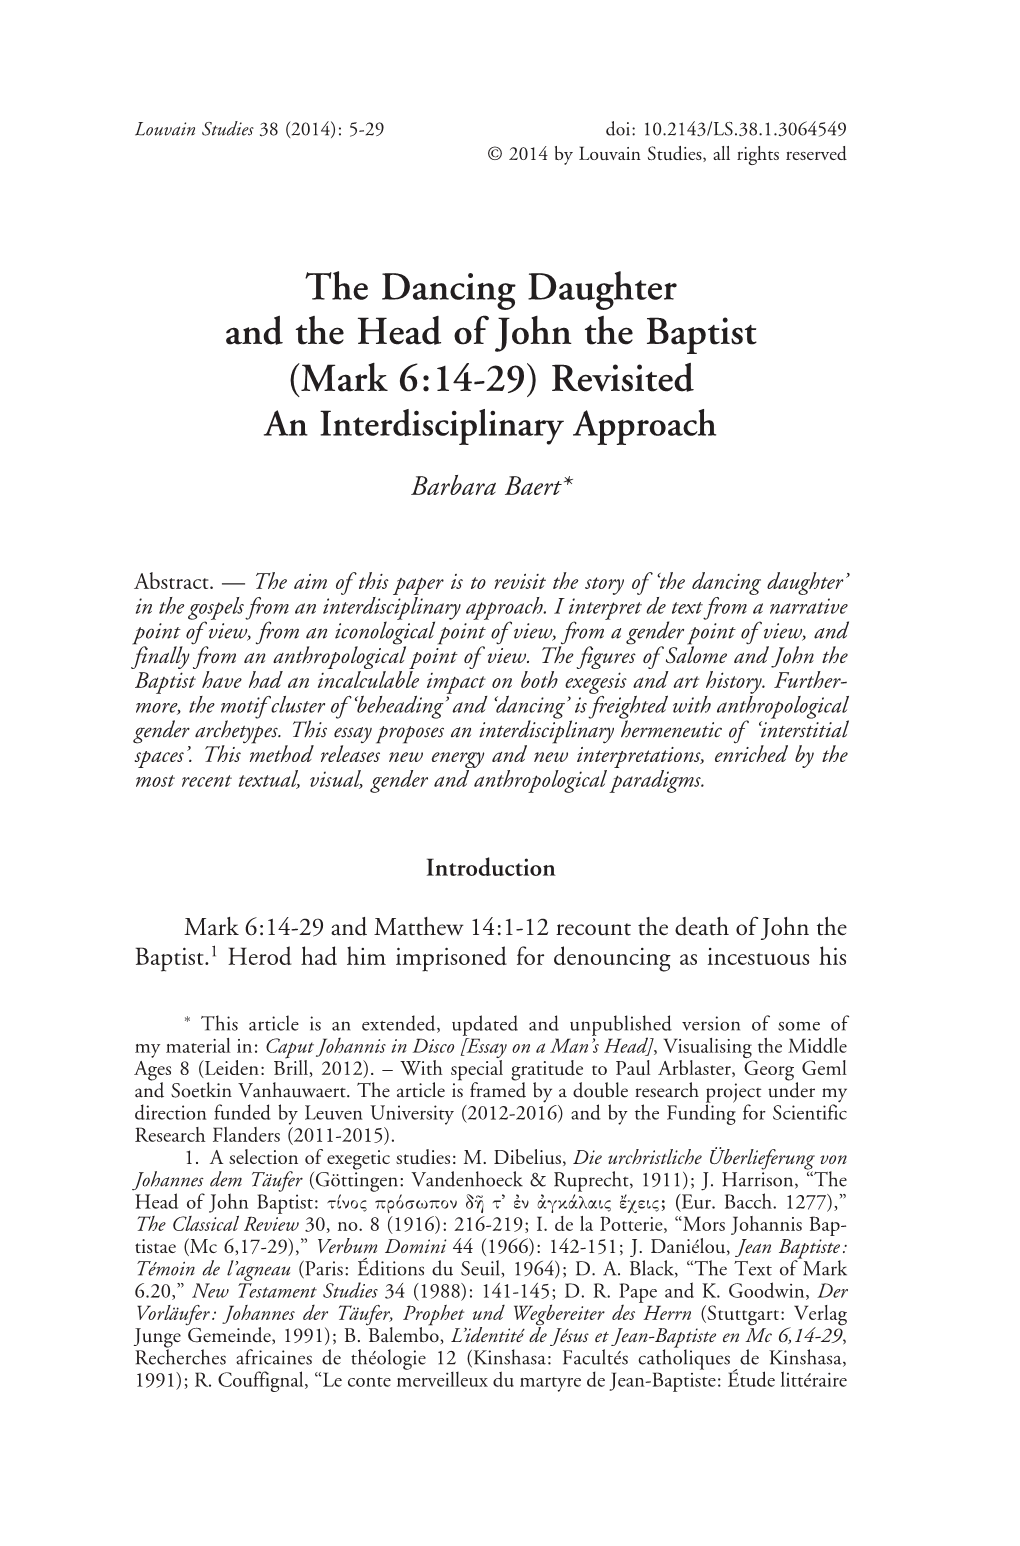 The Dancing Daughter and the Head of John the Baptist (Mark 6:14-29) Revisited an Interdisciplinary Approach